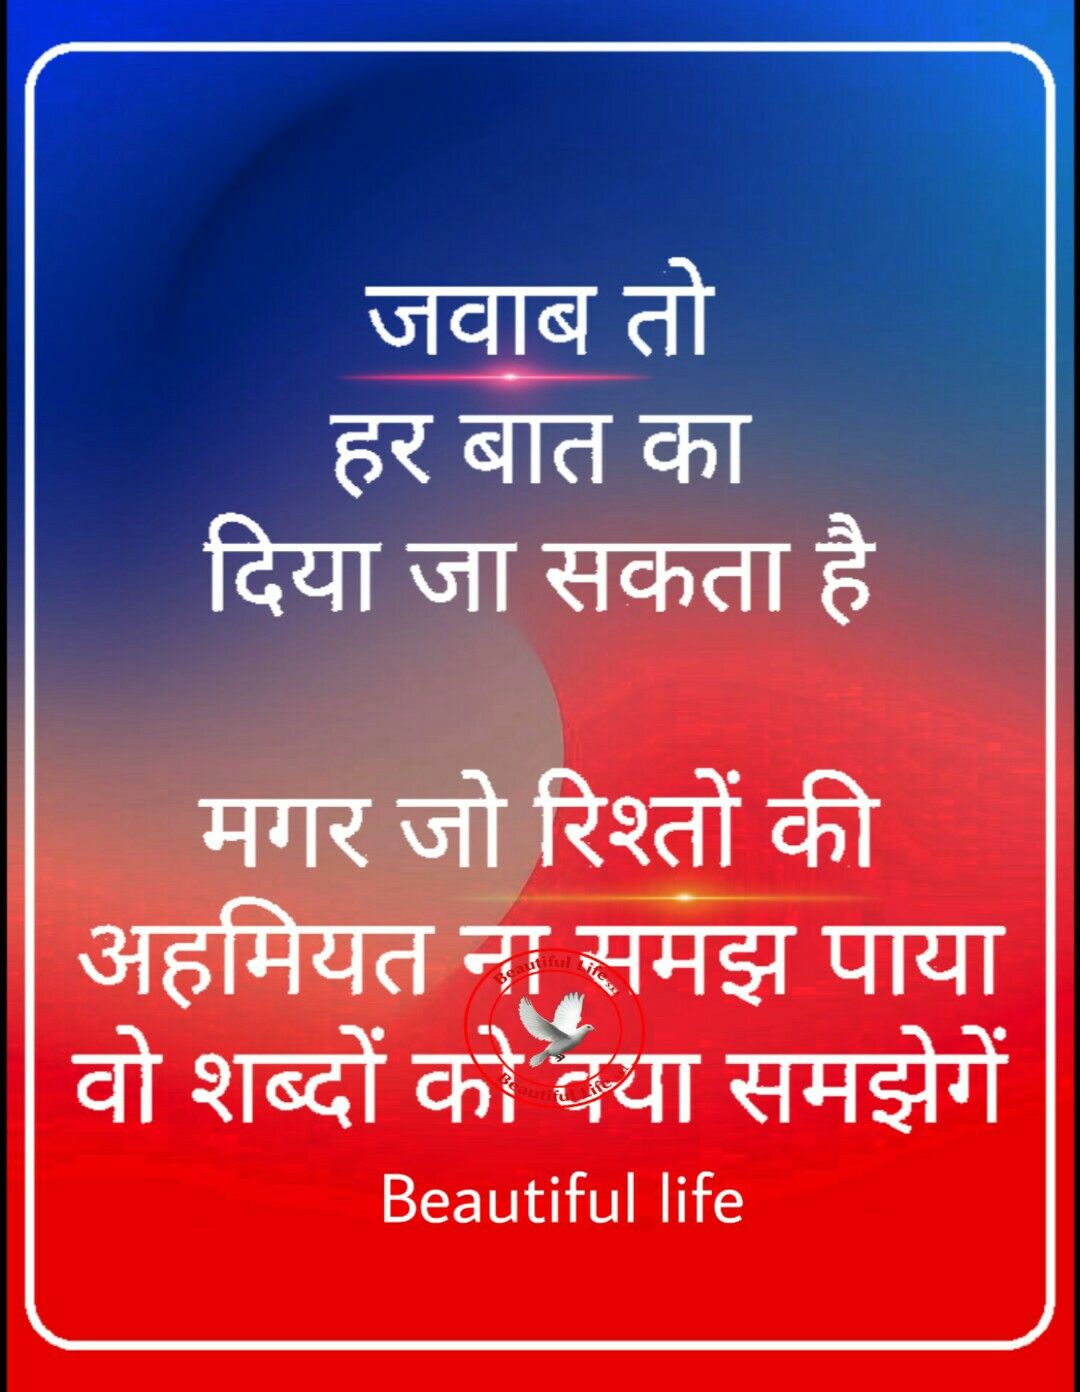 Download Nice Quotes On Life In Hindi Nomer 2